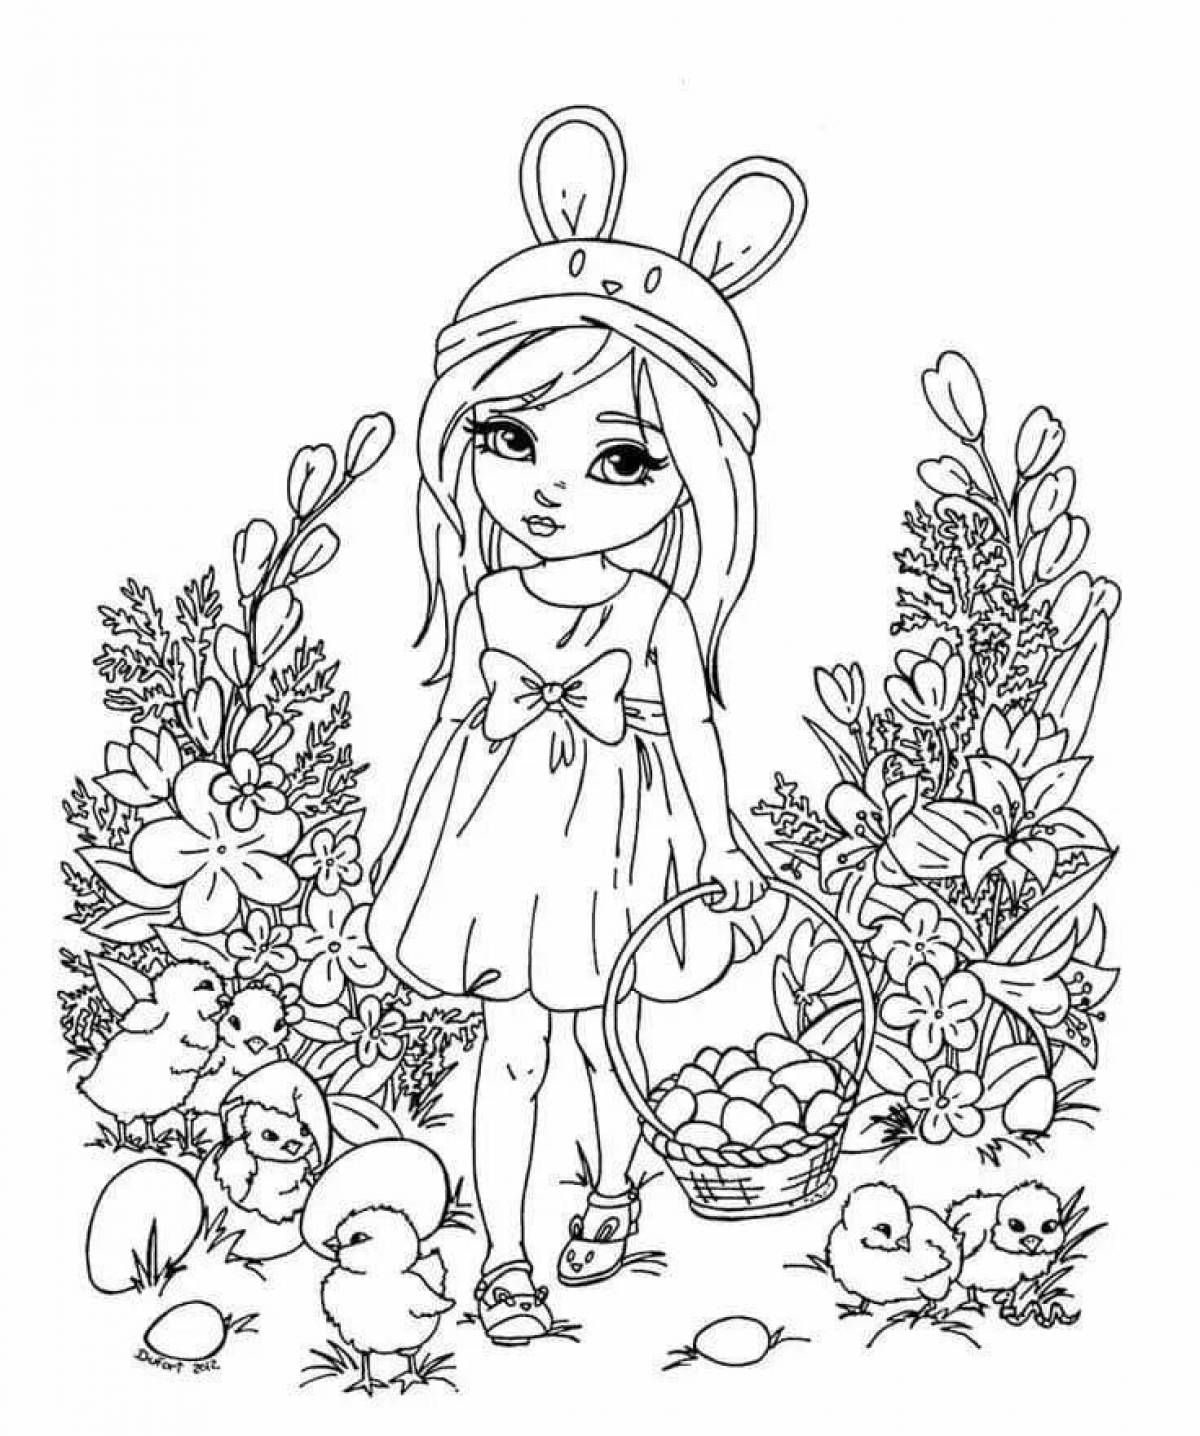 Coloring pages for girls 11 years old